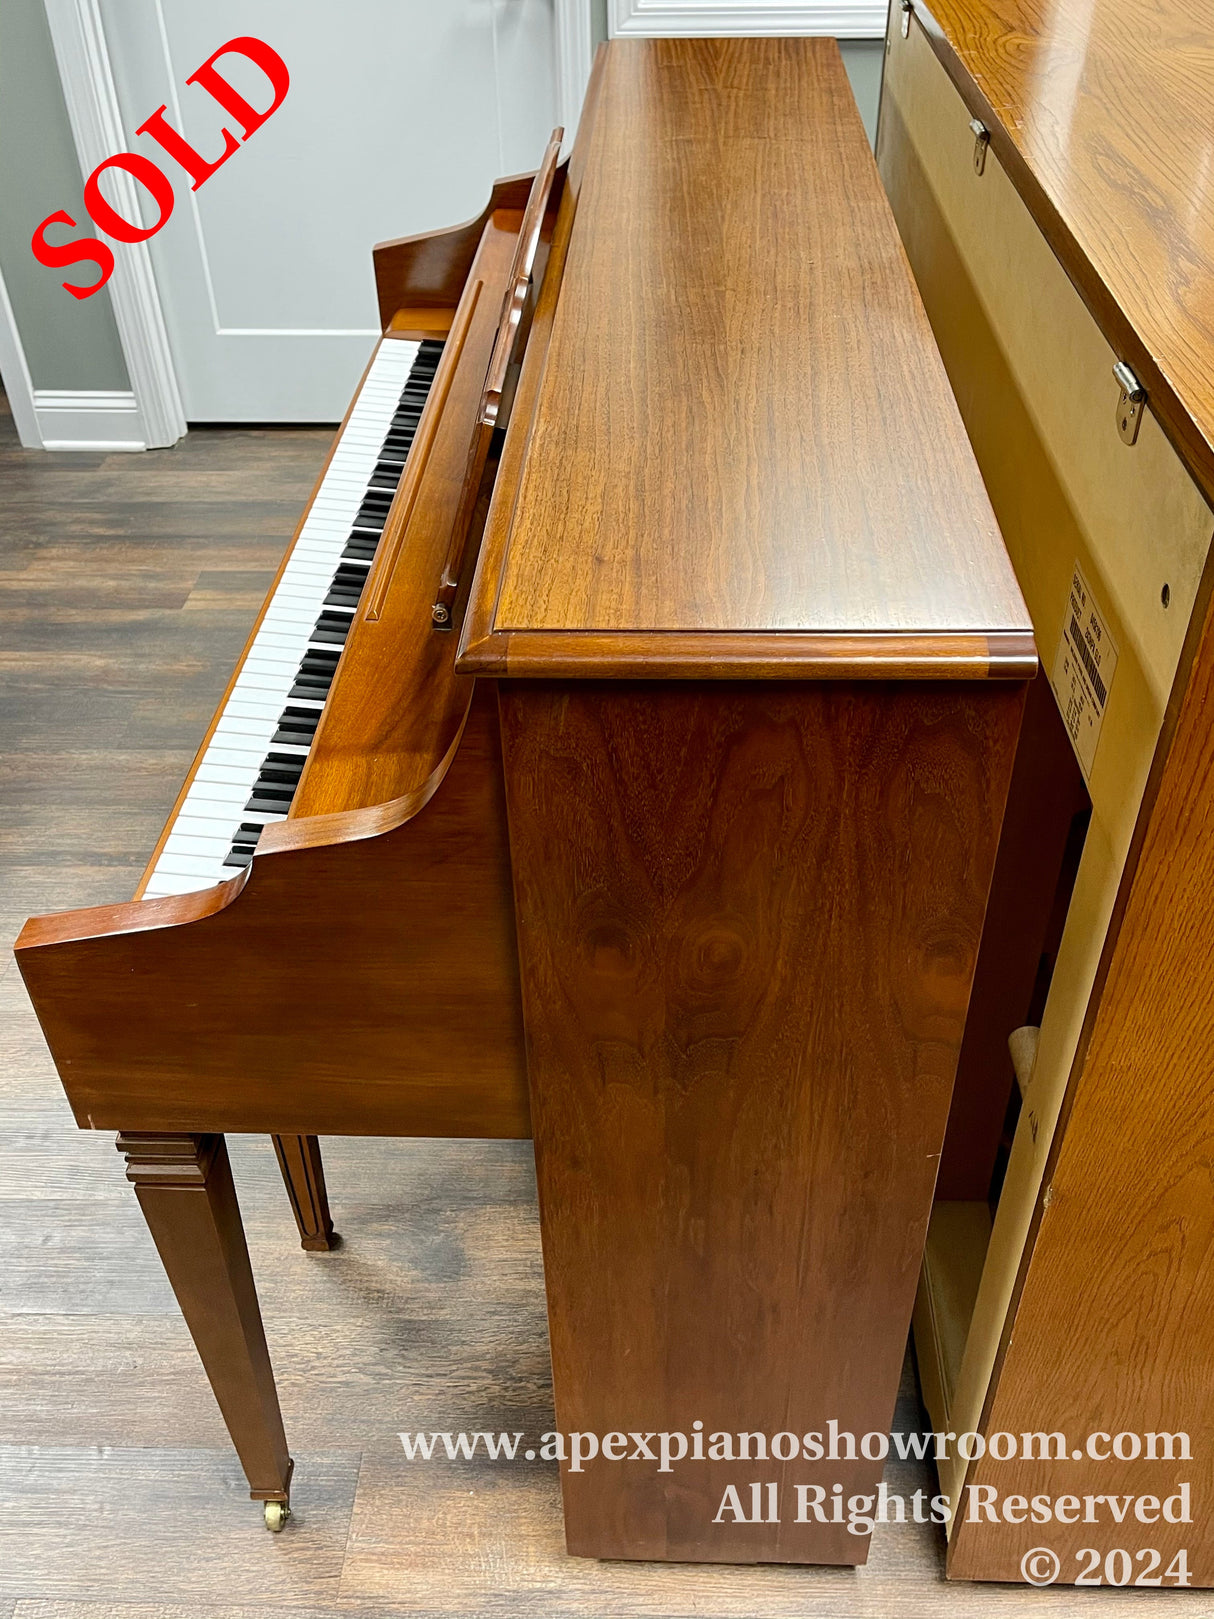 An upright piano with a brown wooden finish on display in a showroom, featuring a hinged top cover revealing ivory and black keys, with piano legs and pedals visible, set against a wood-patterned floor and light grey walls.